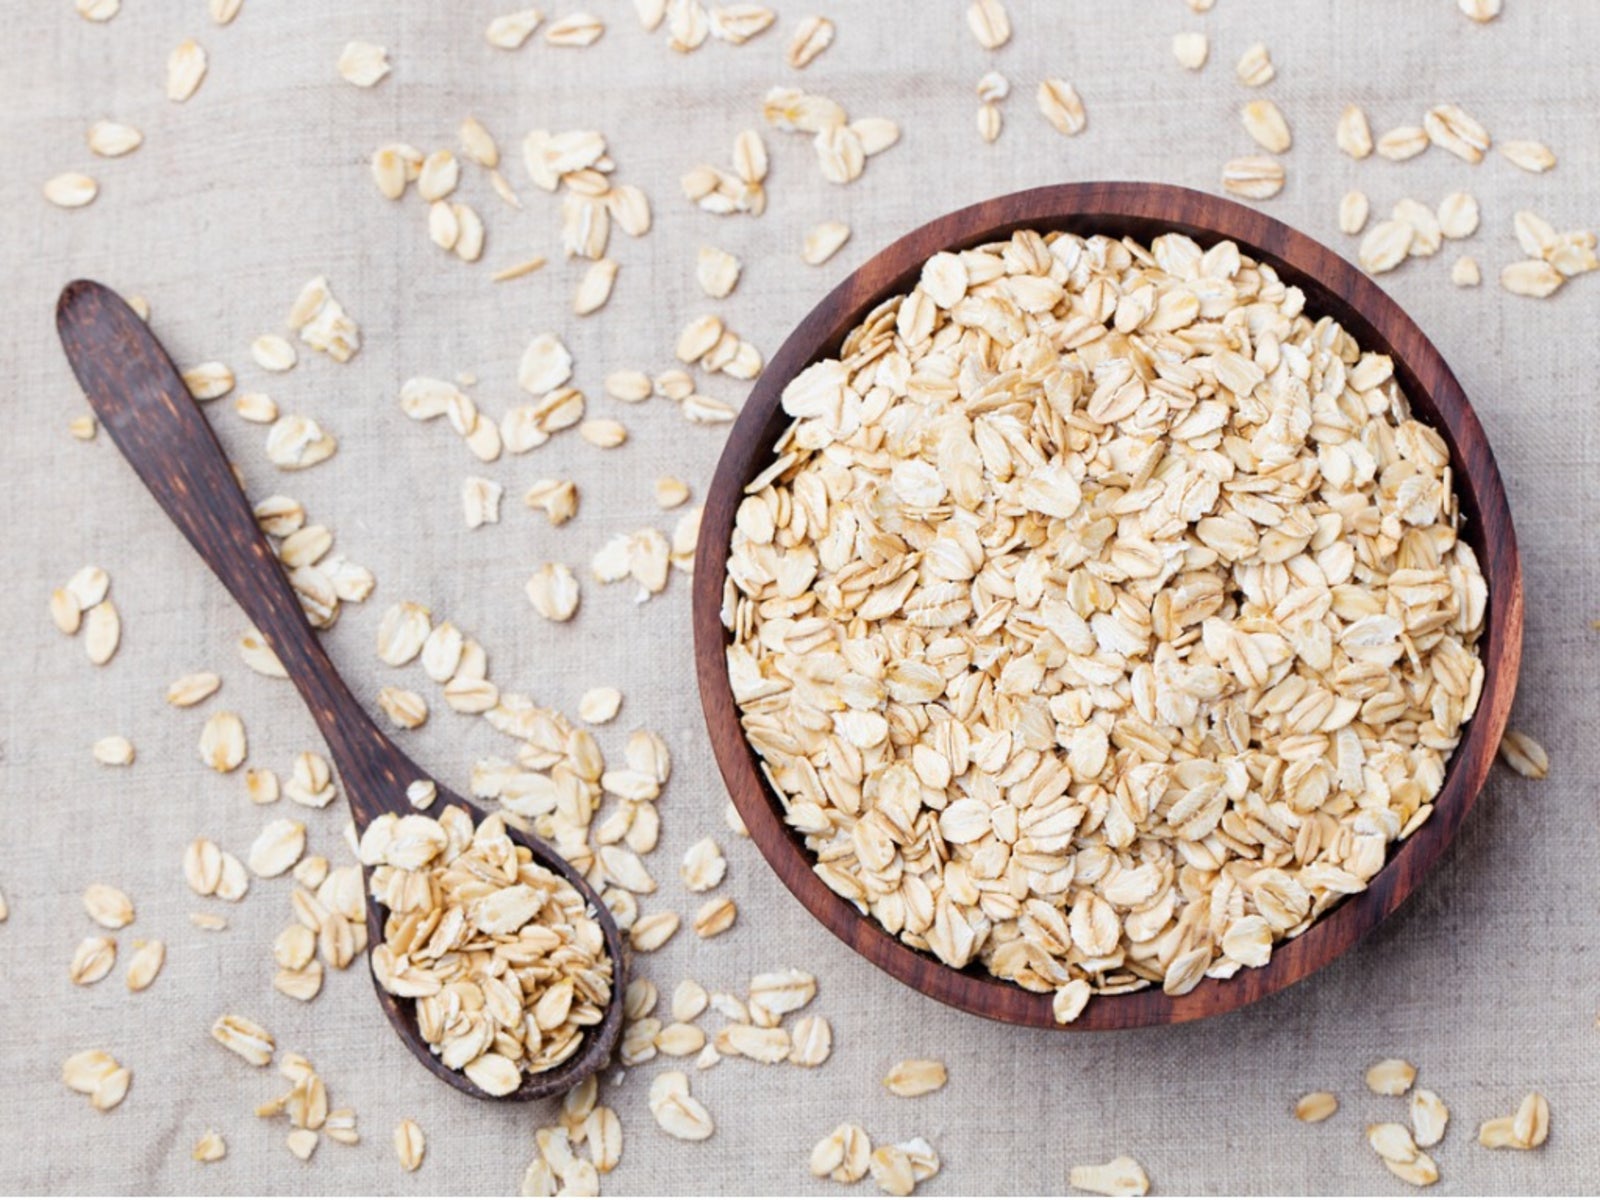 Is oatmeal a good fertilizer Discover the surprising benefits oatmeal can offer your plants